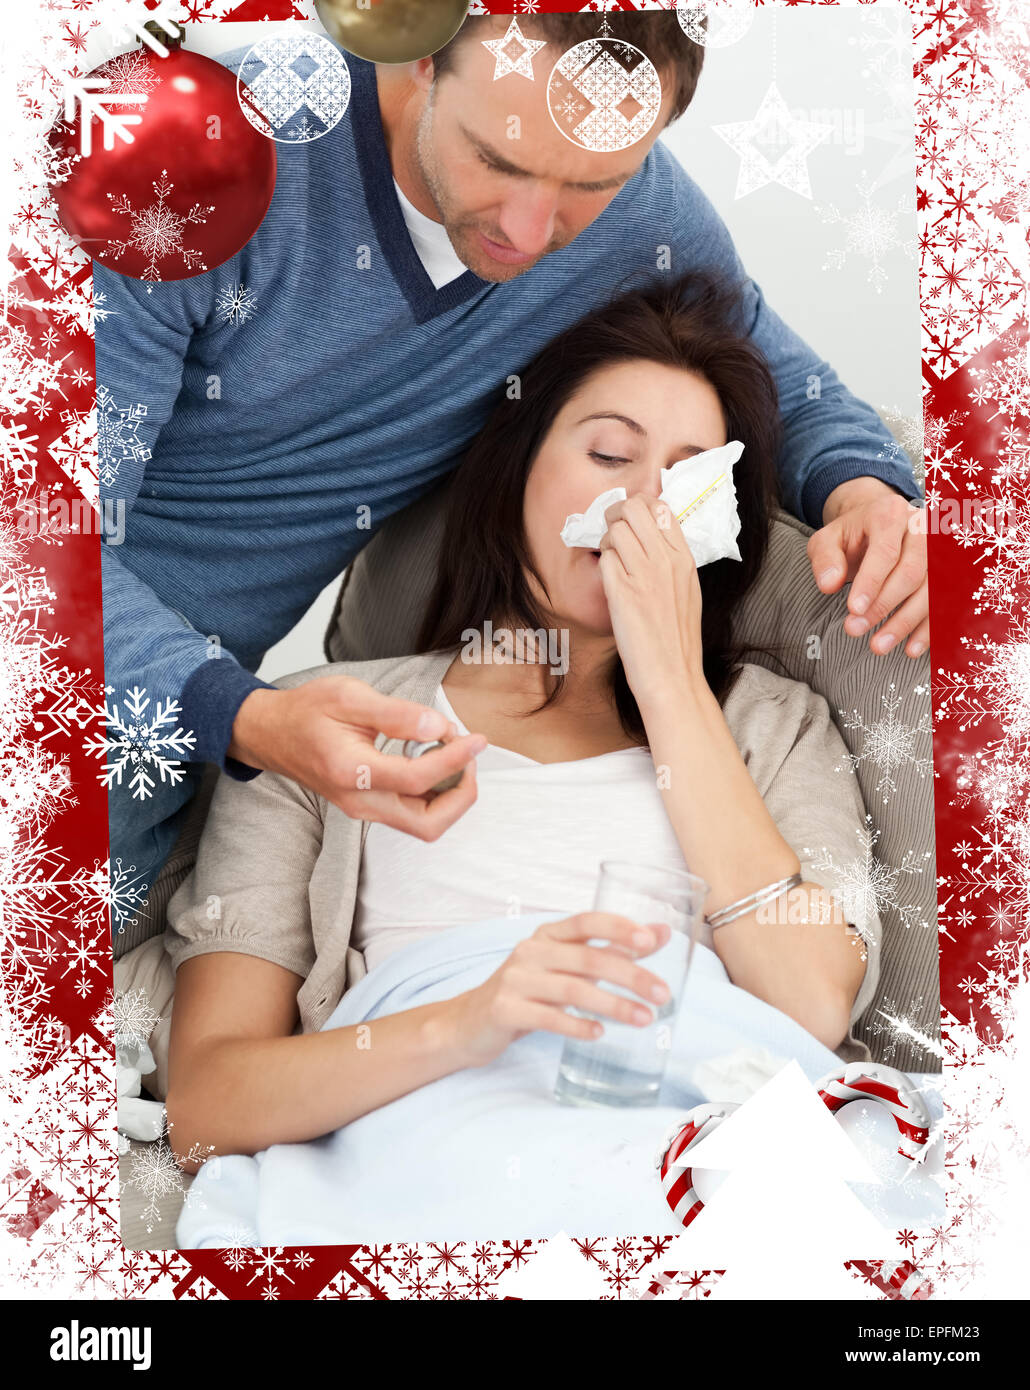 Handsome man taking care of his sick girlfriend Stock Photo